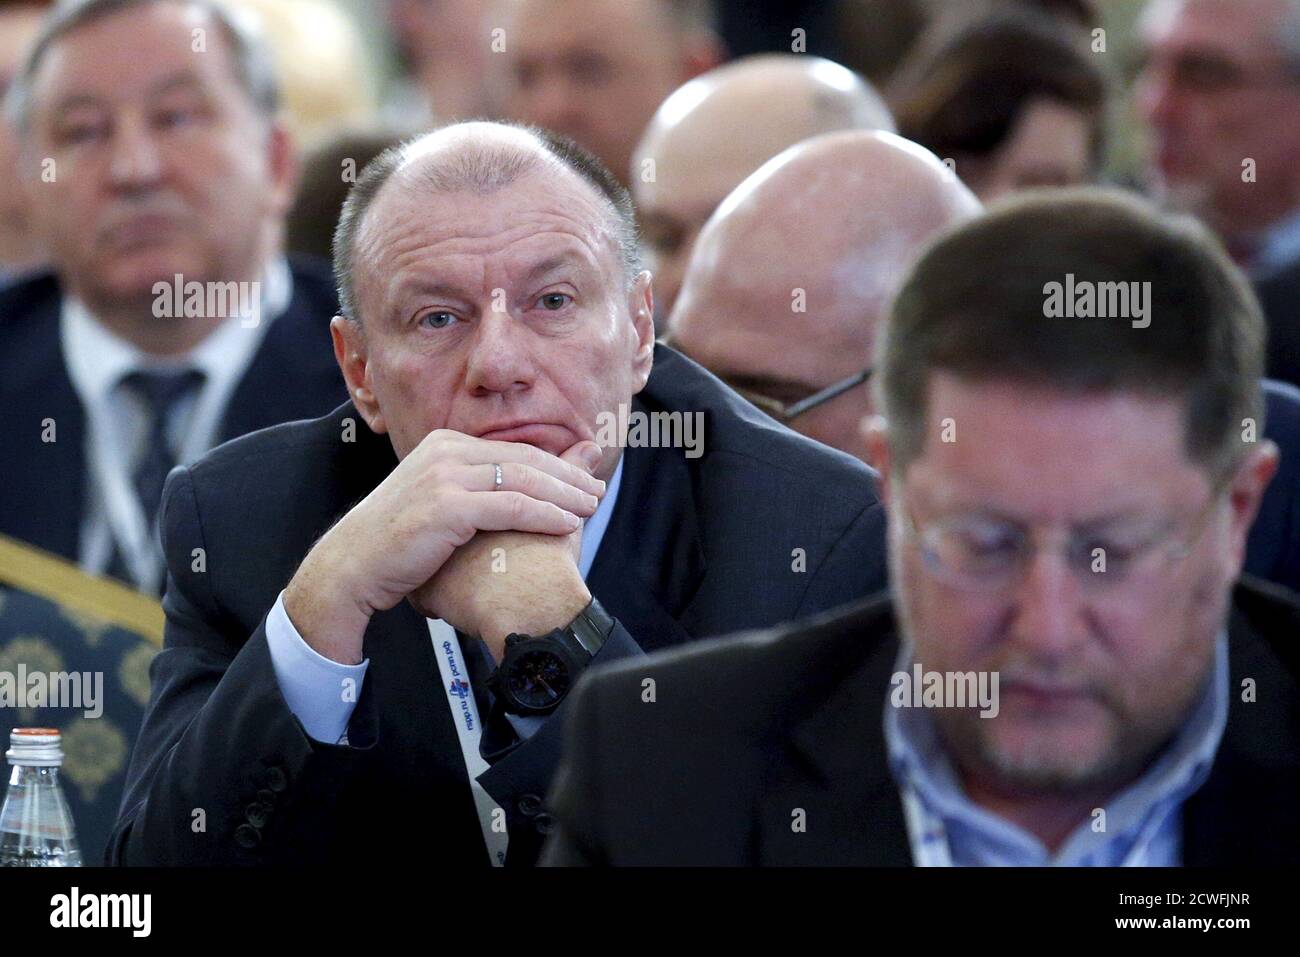 Vladimir Potanin (L, front), chief executive of Norilsk Nickel company and Russia's richest man, attends a session during the Week of Russian Business, organized by the Russian Union of Industrialists and Entrepreneurs (RSPP), in Moscow, March 19, 2015. Russia's Norilsk Nickel , the world's second largest nickel and largest palladium producer, is considering a buy-back of its shares to support its stock, Interfax news agency quoted Vladimir Potanin, its chief executive, as saying on Thursday. REUTERS/Maxim Zmeyev Stock Photo